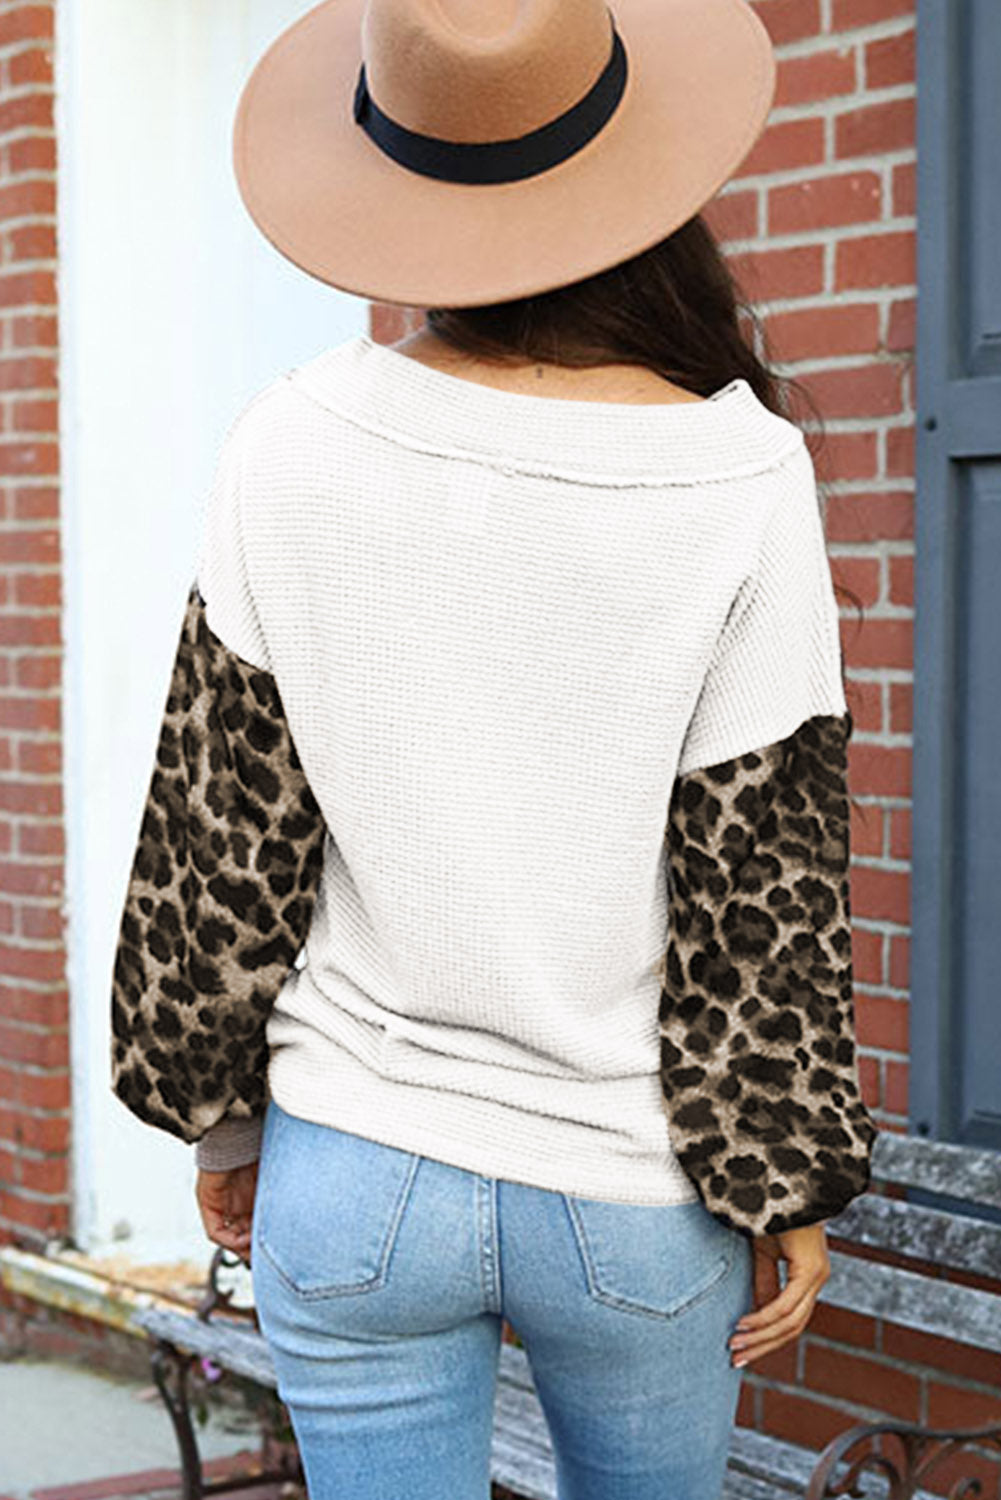 Apricot Wild Leopard Contrast Sleeve Colorblock Waffle Knit Top Long Sleeve Tops JT's Designer Fashion